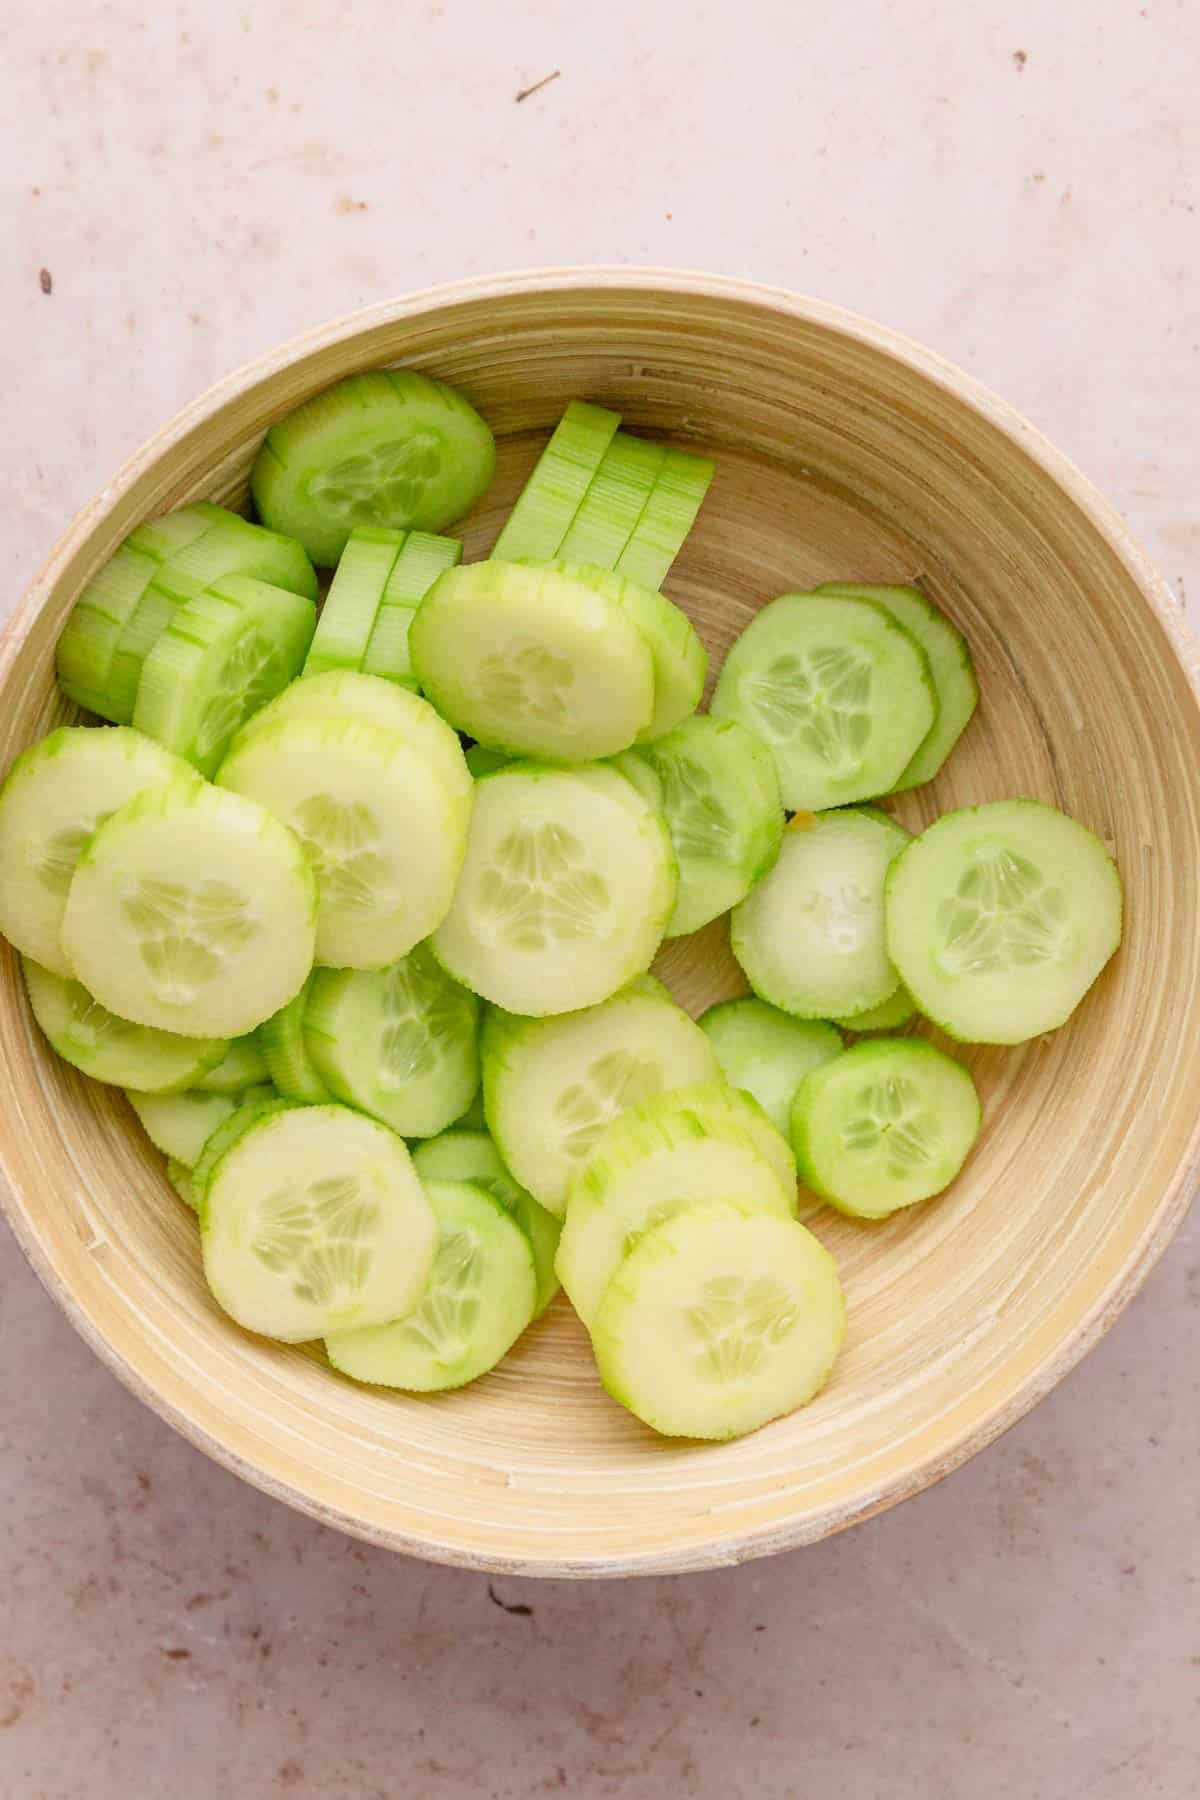 peeled and sliced cucumbers in a bowl.